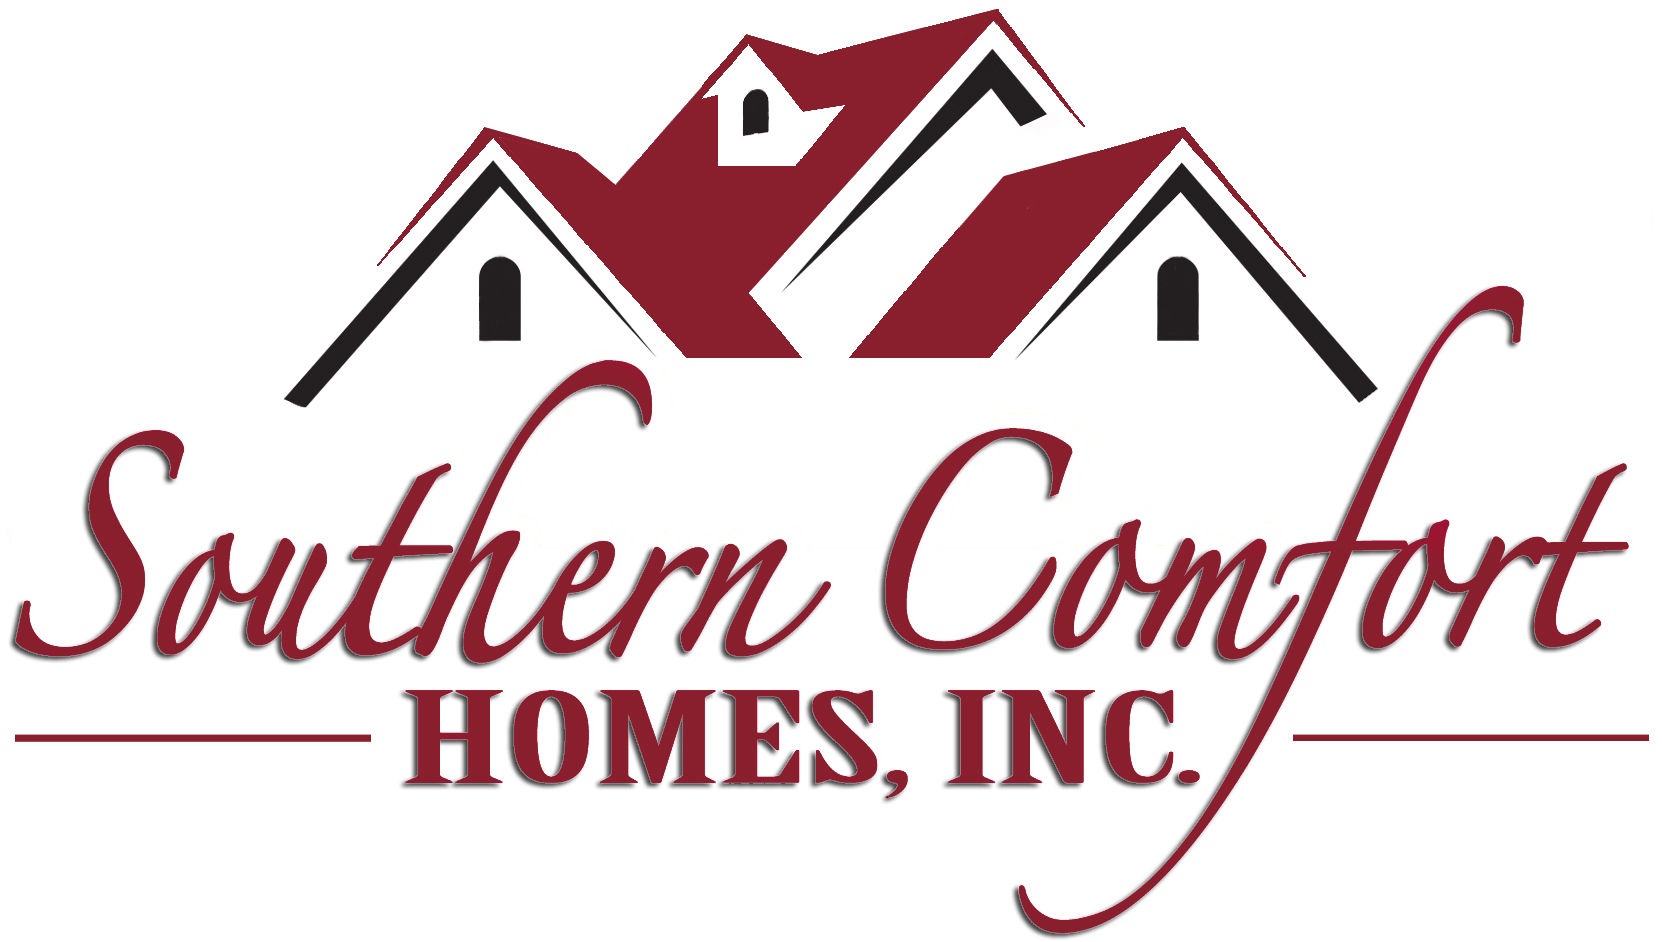 Southern Comfort Homes